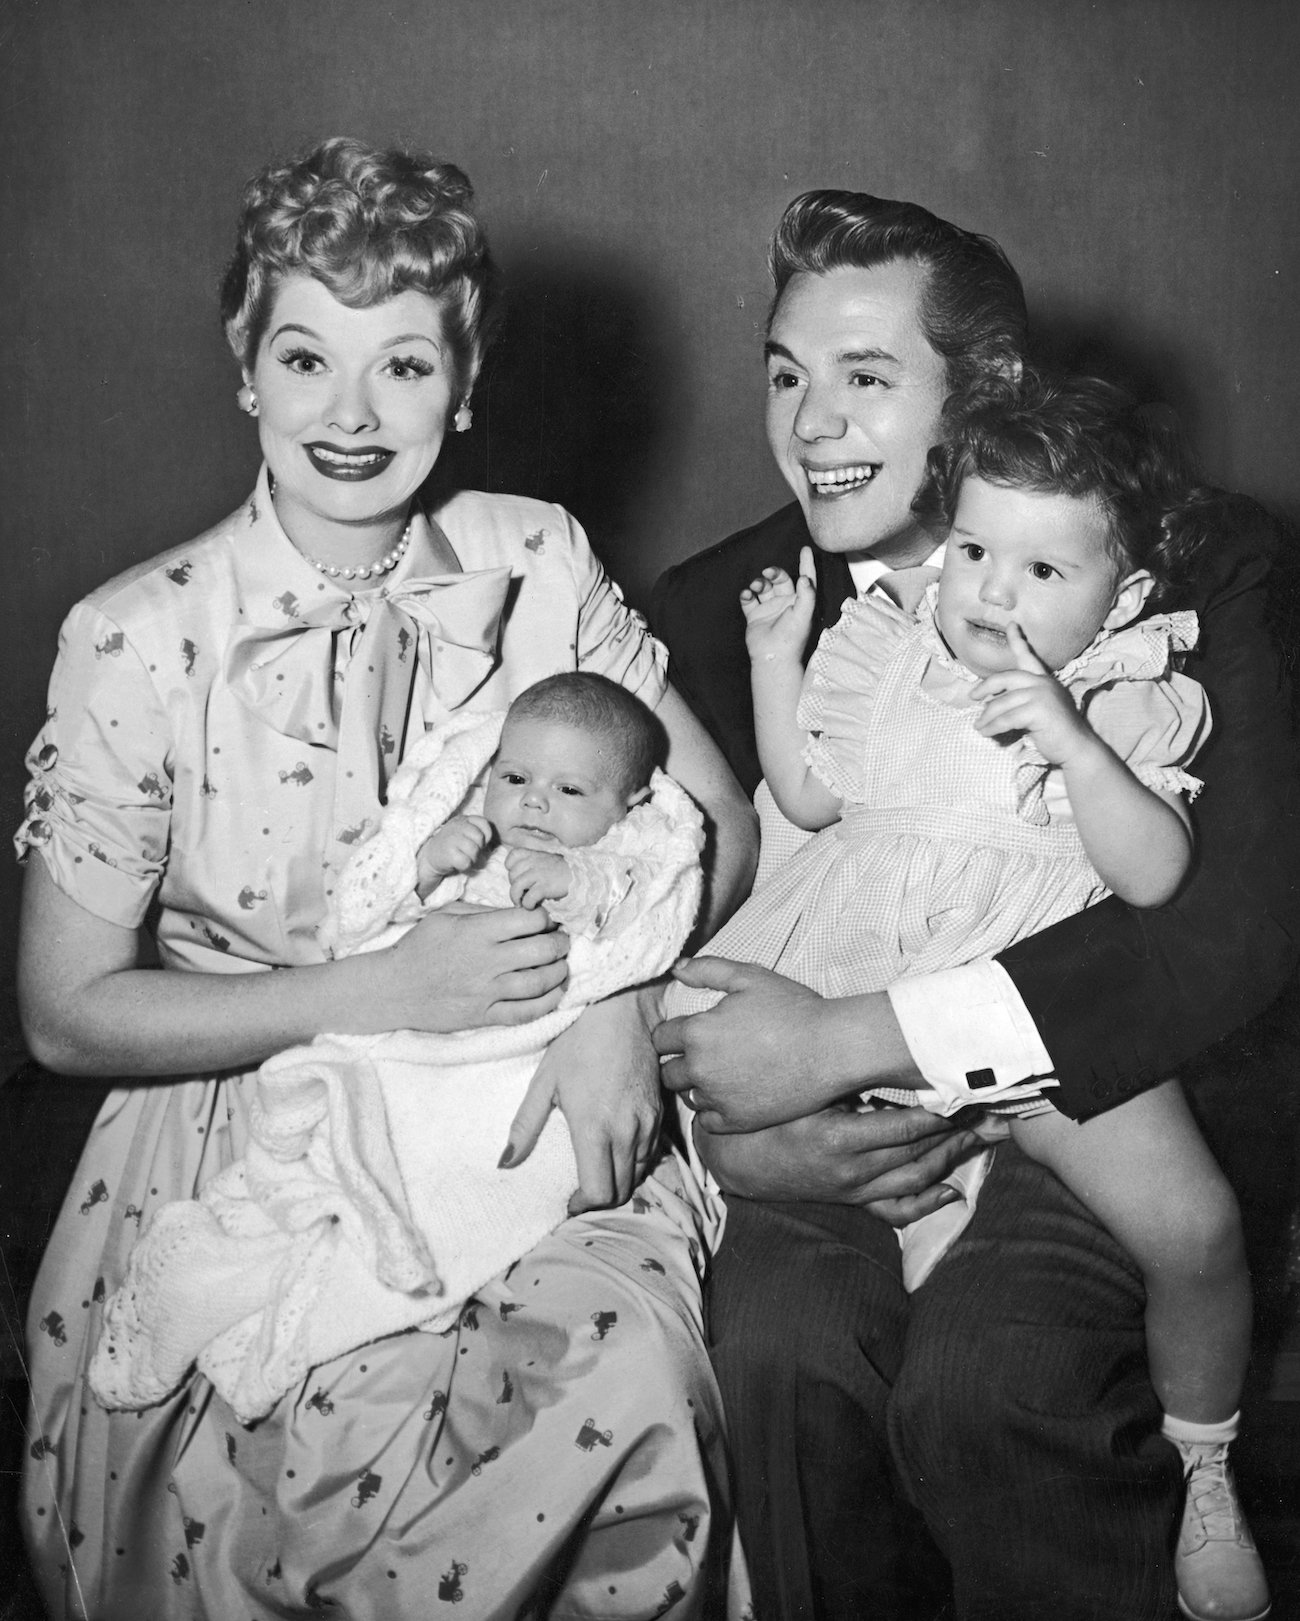 Lucille Ball and Desi Arnaz with their two children, Desi Jr. (left) and Lucie